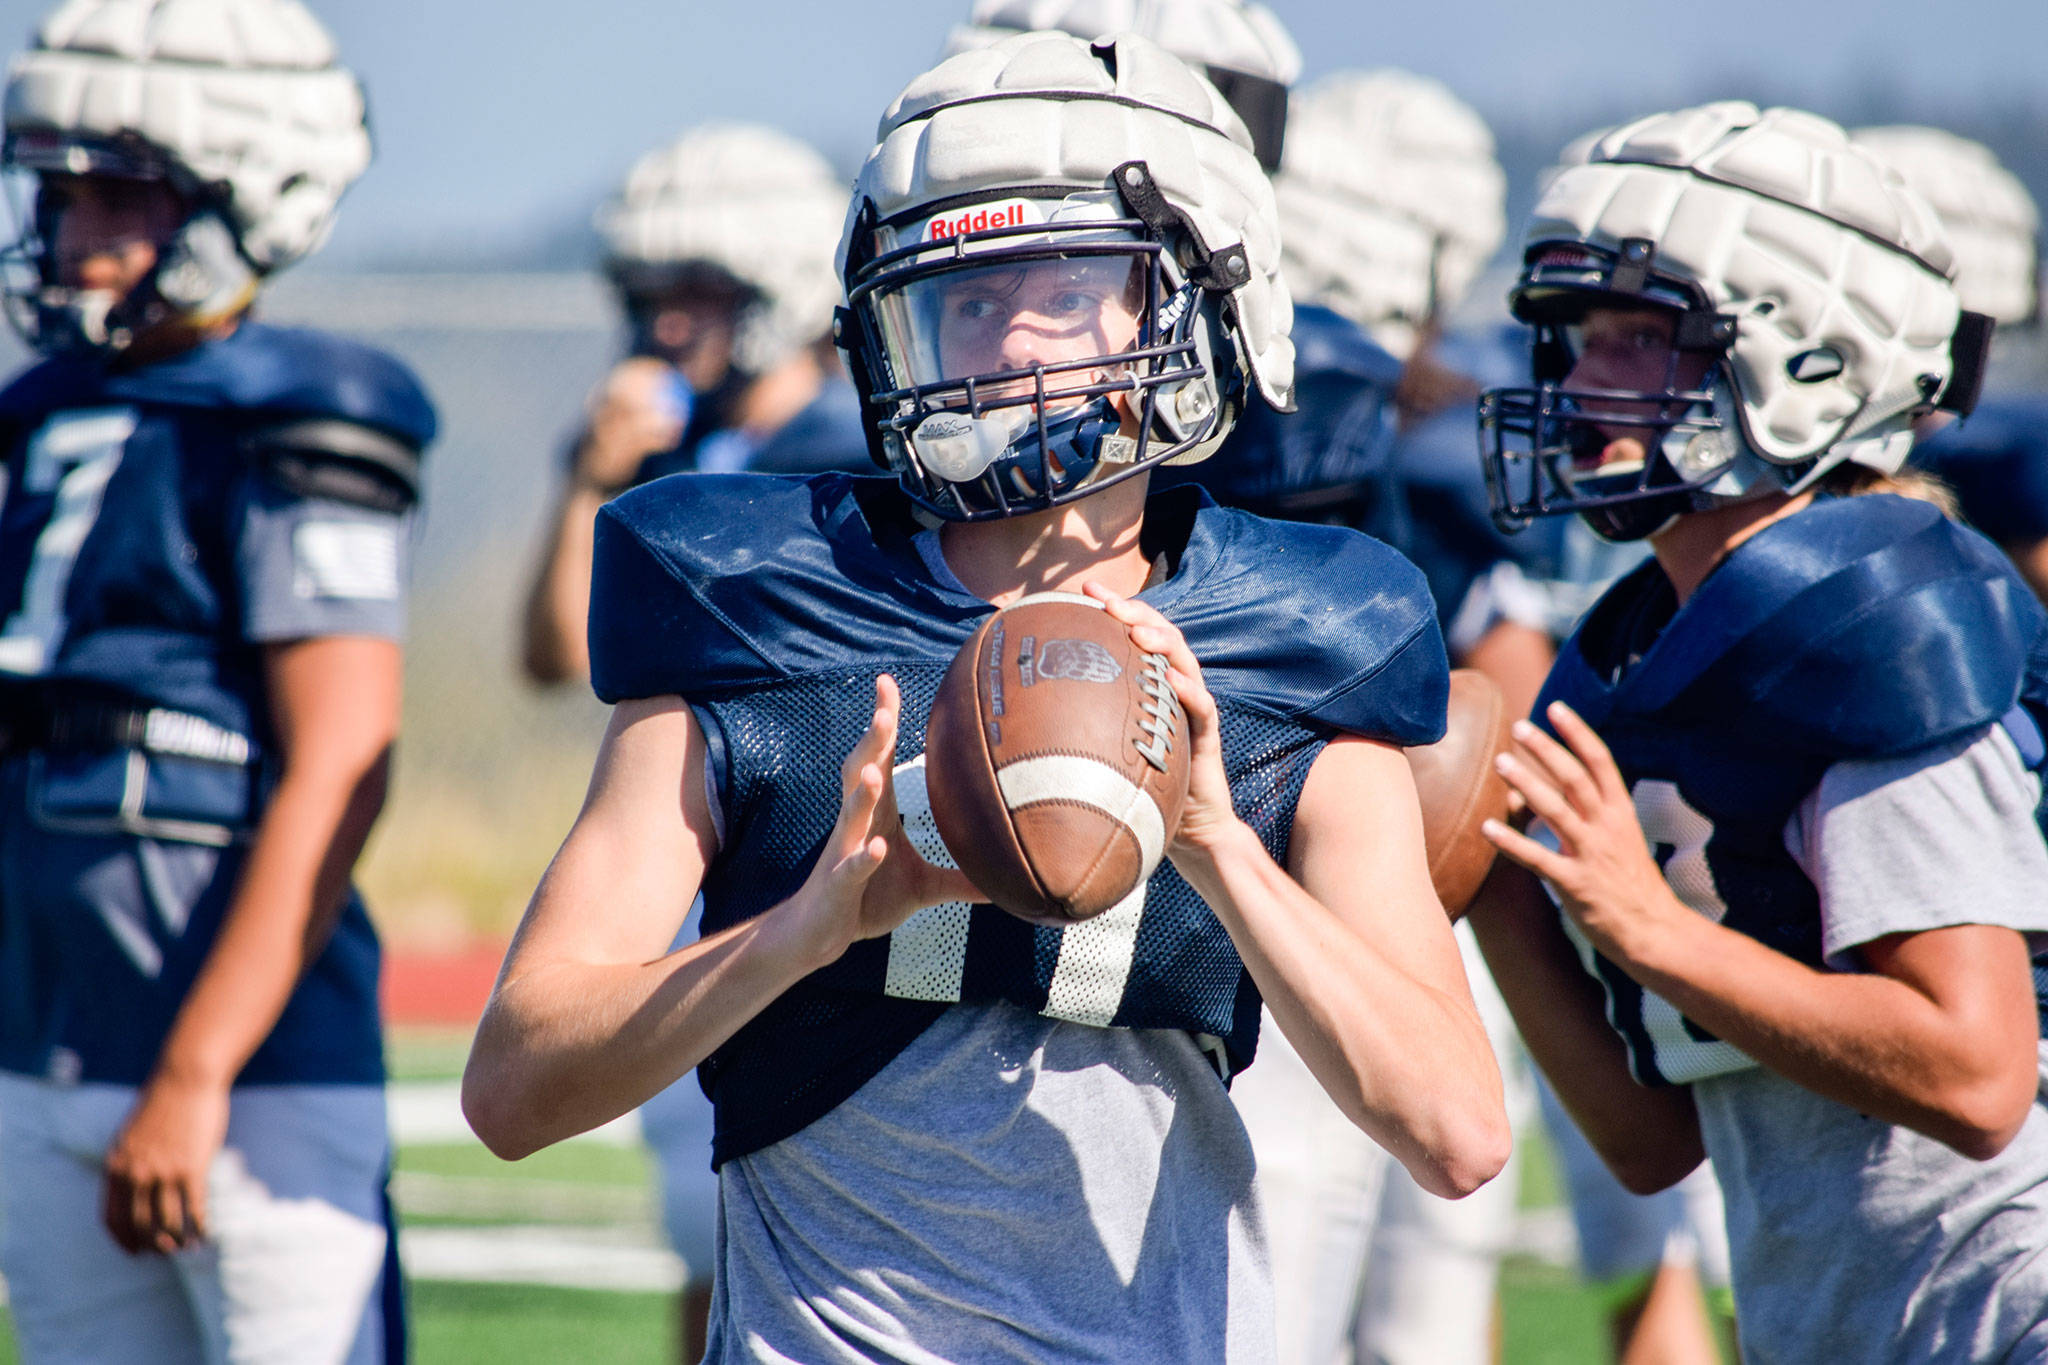 Sophomore Jadon Claps prepares to throw to a receiver during football practice on Aug. 27, 2019, at Glacier Peak High School in Snohomish. (Katie Webber / The Herald)